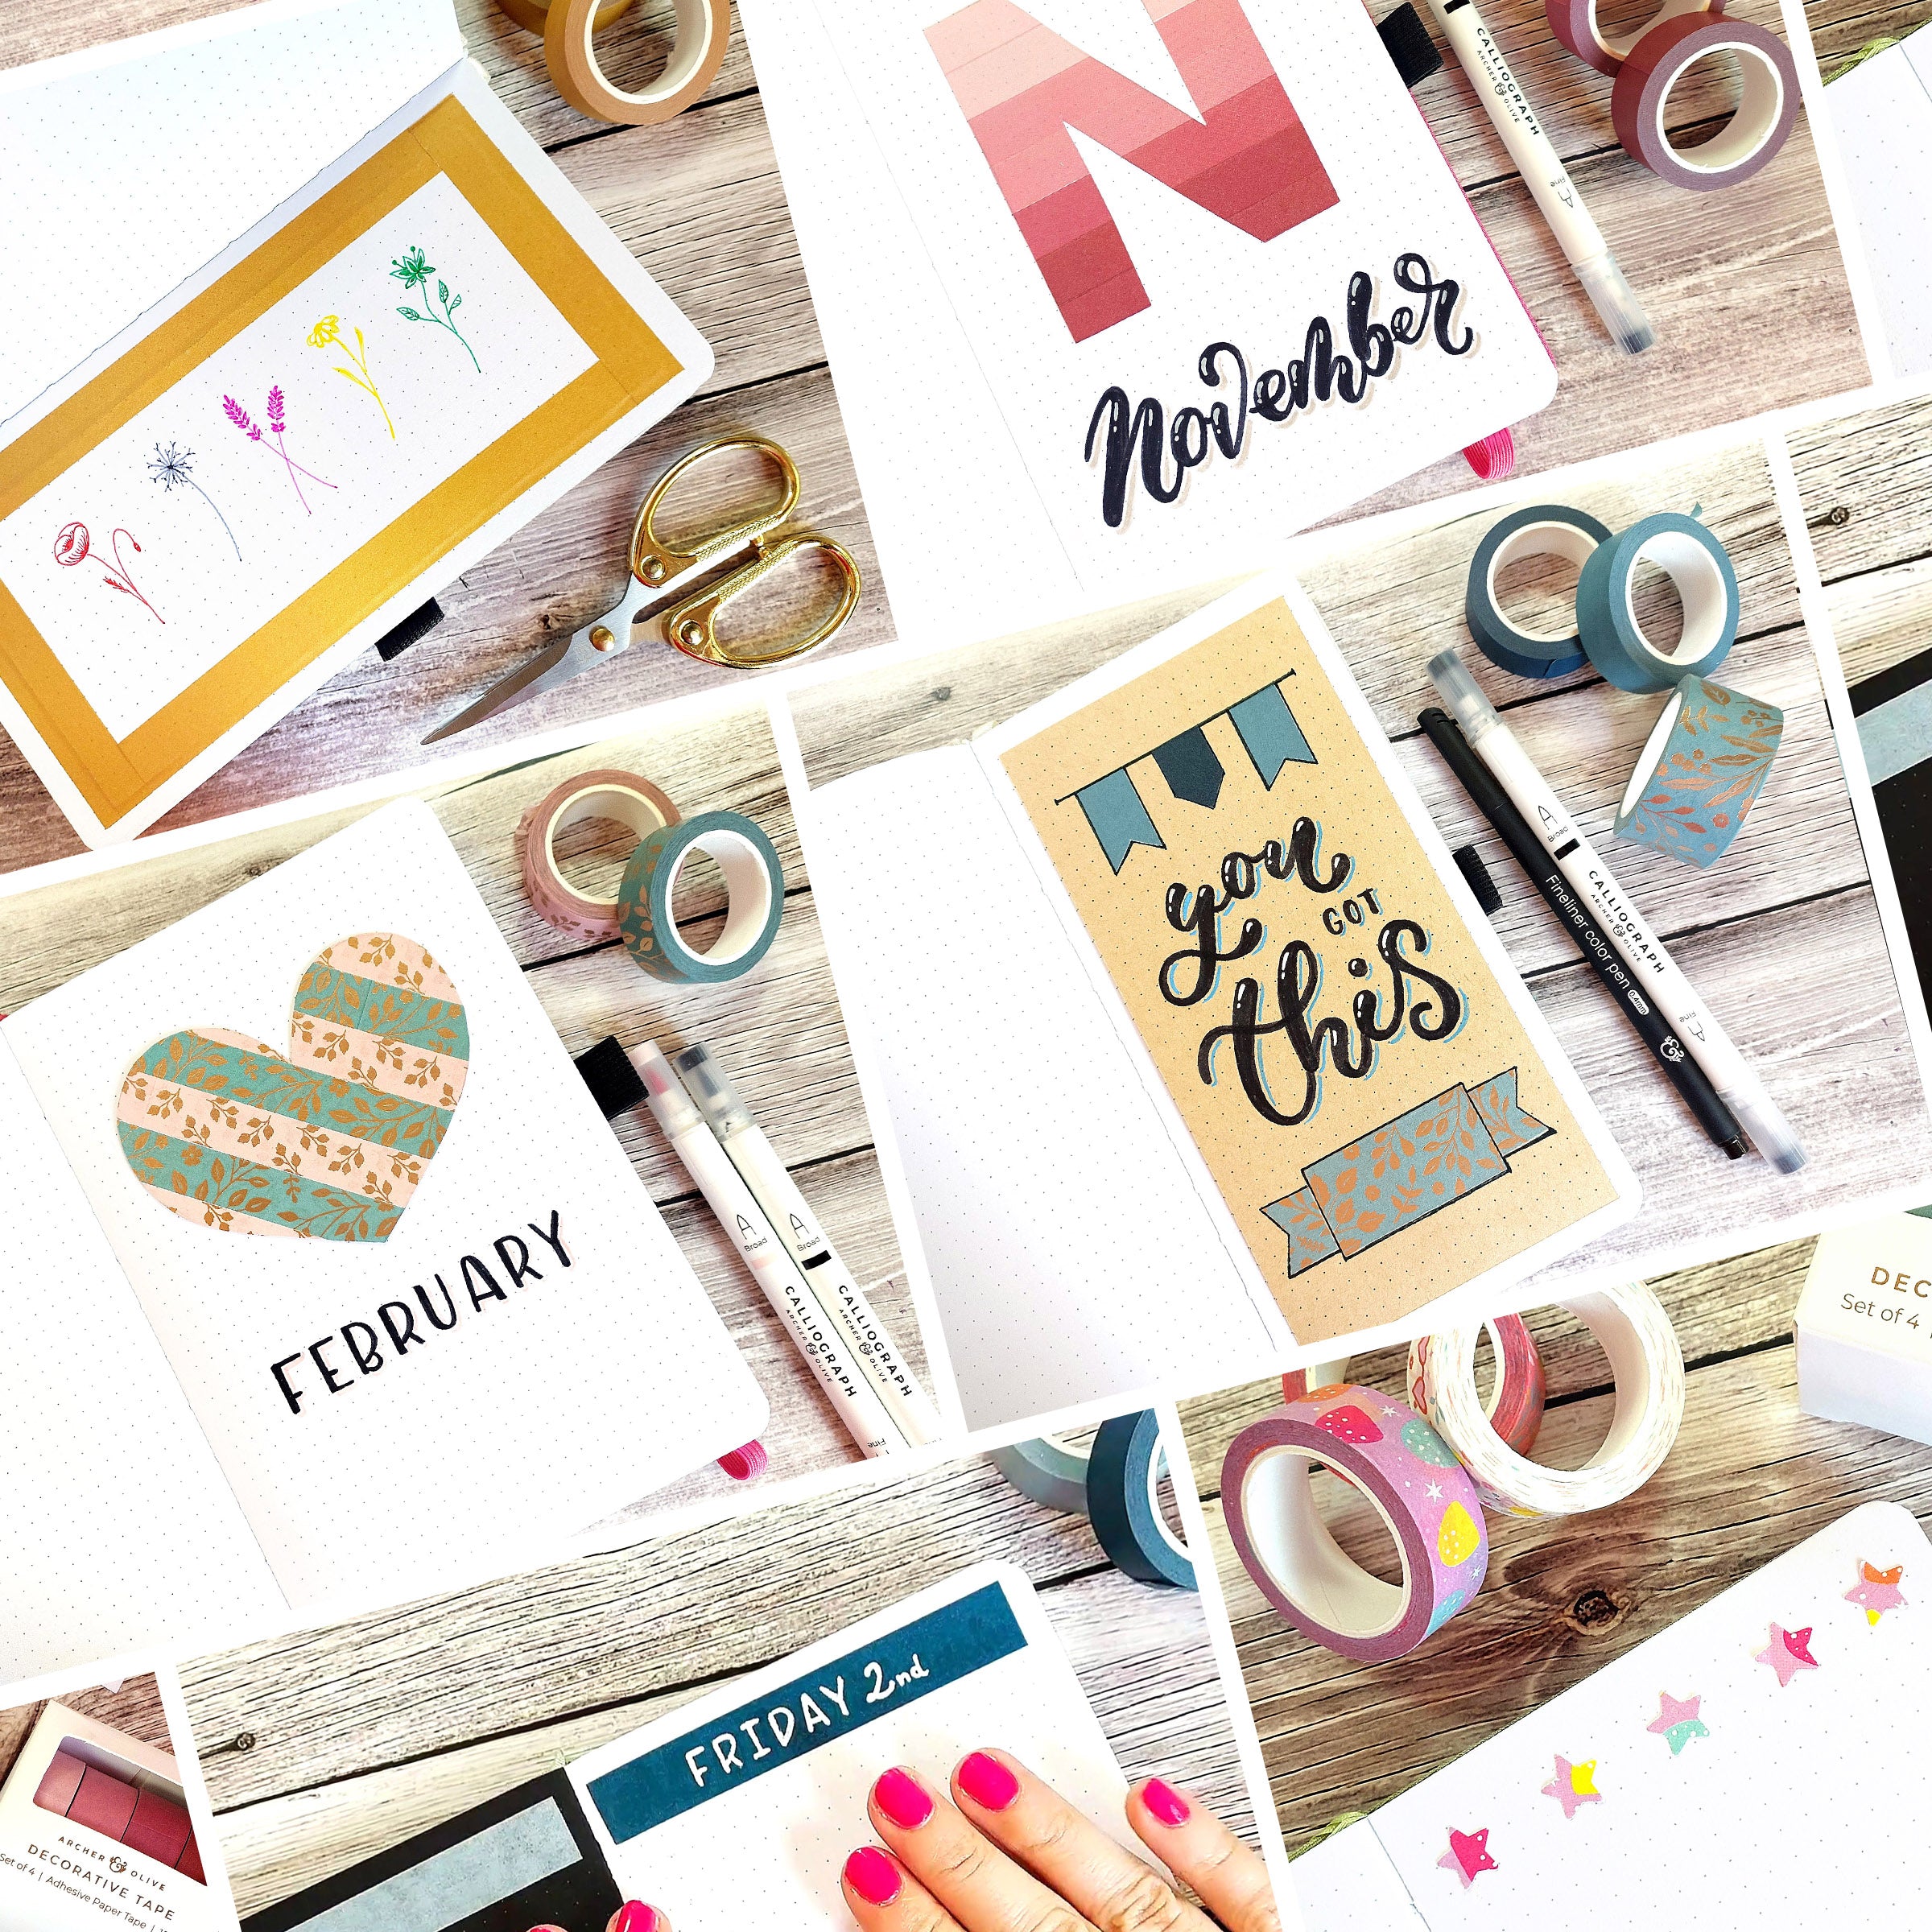 Clever Washi Tape Ideas For Your Bullet Journal